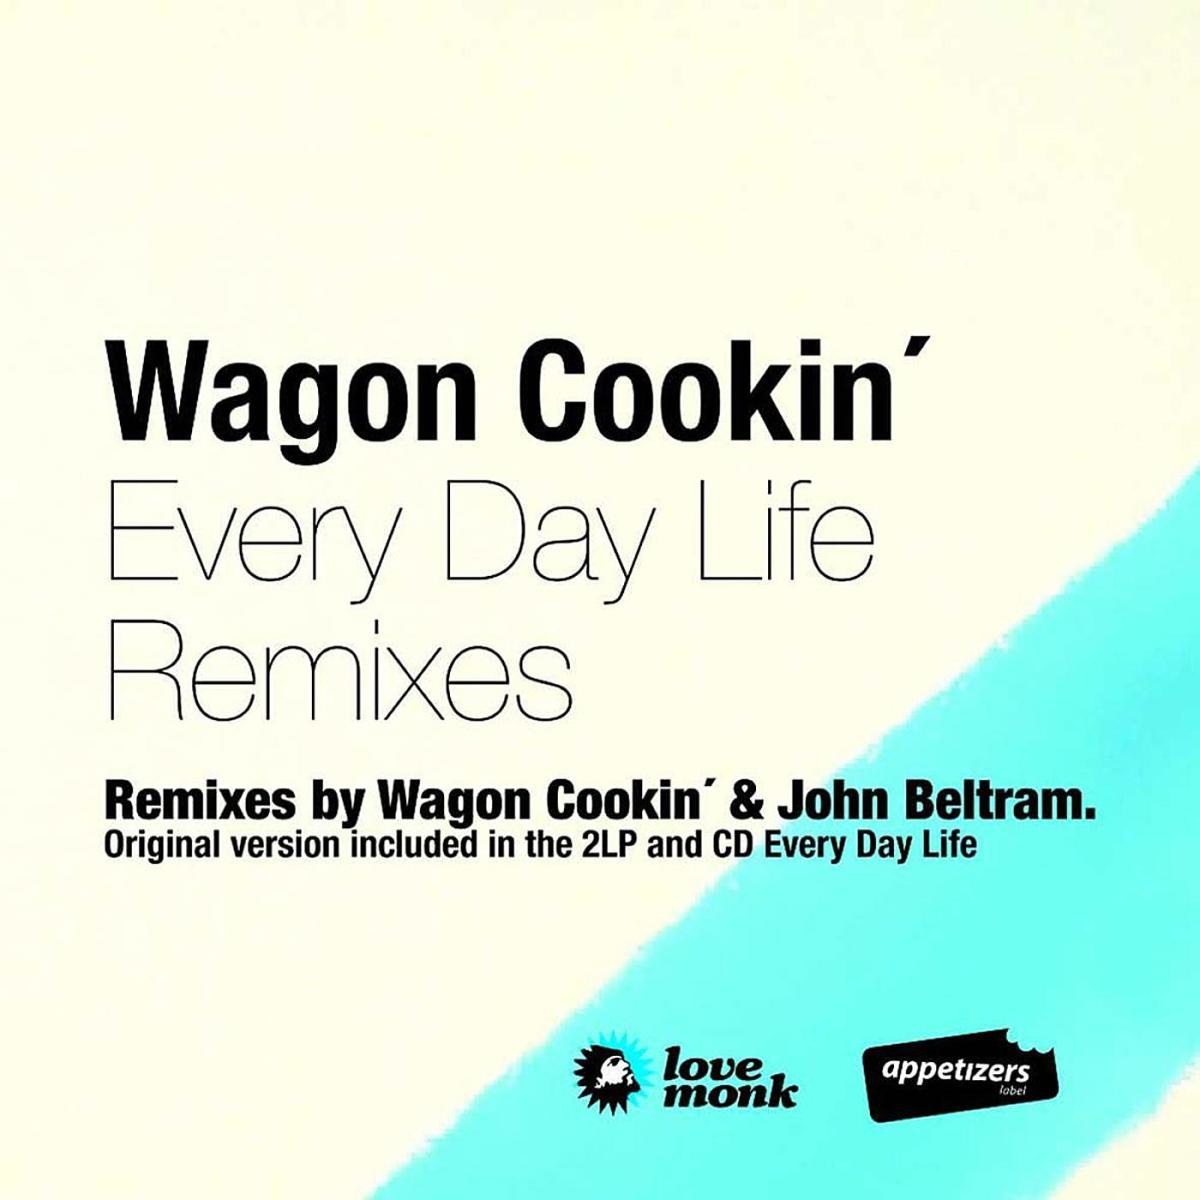 Wagon Cookin' - Every Day Life Remixes / Lovemonk